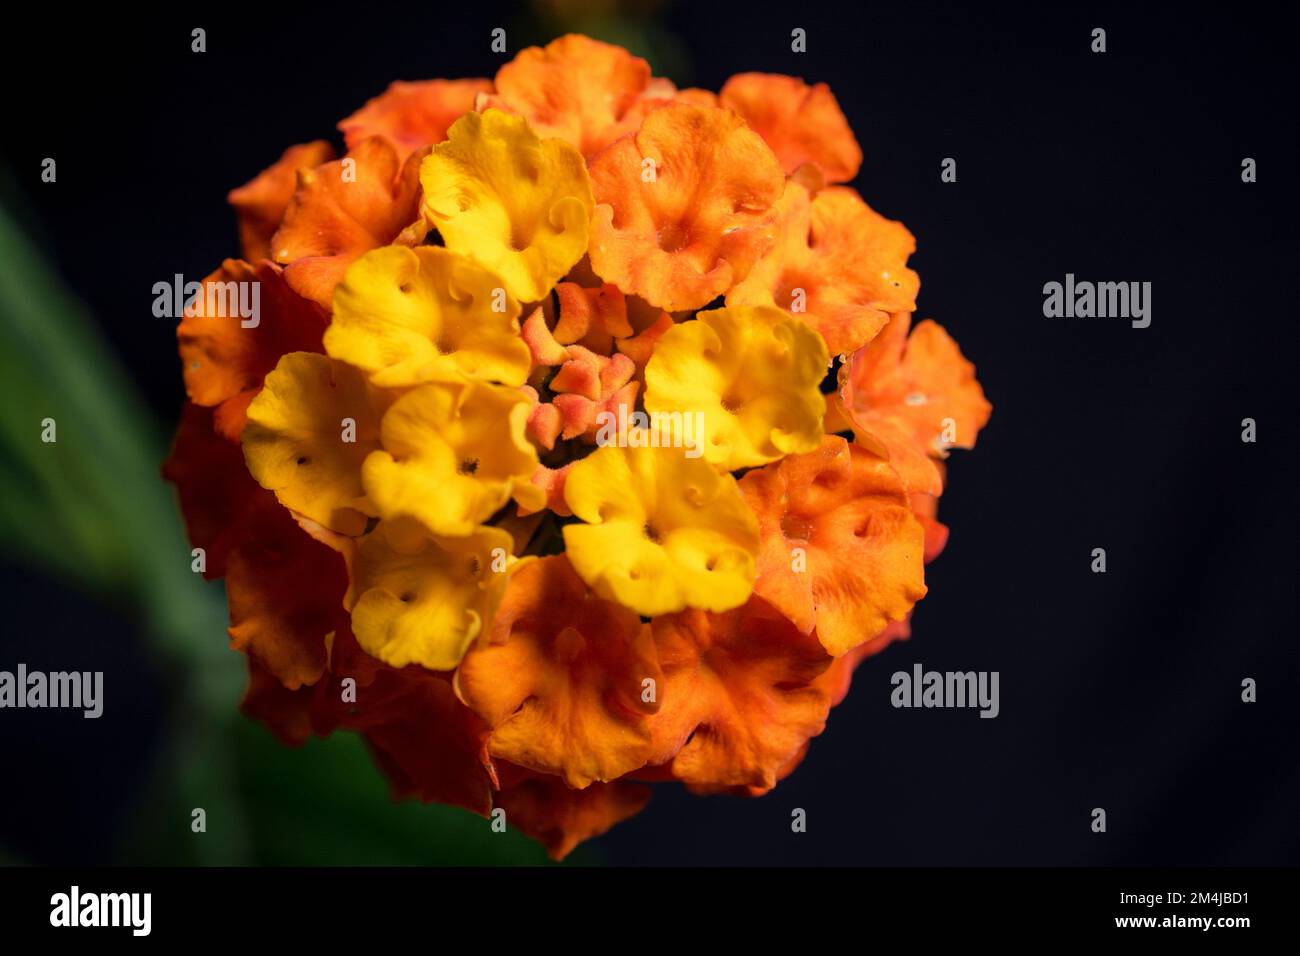 Lantana camara, commonly called lantana, is a shrub in the genus Lantana. It is native to Central and South America. It is included in the list of 100 Stock Photo